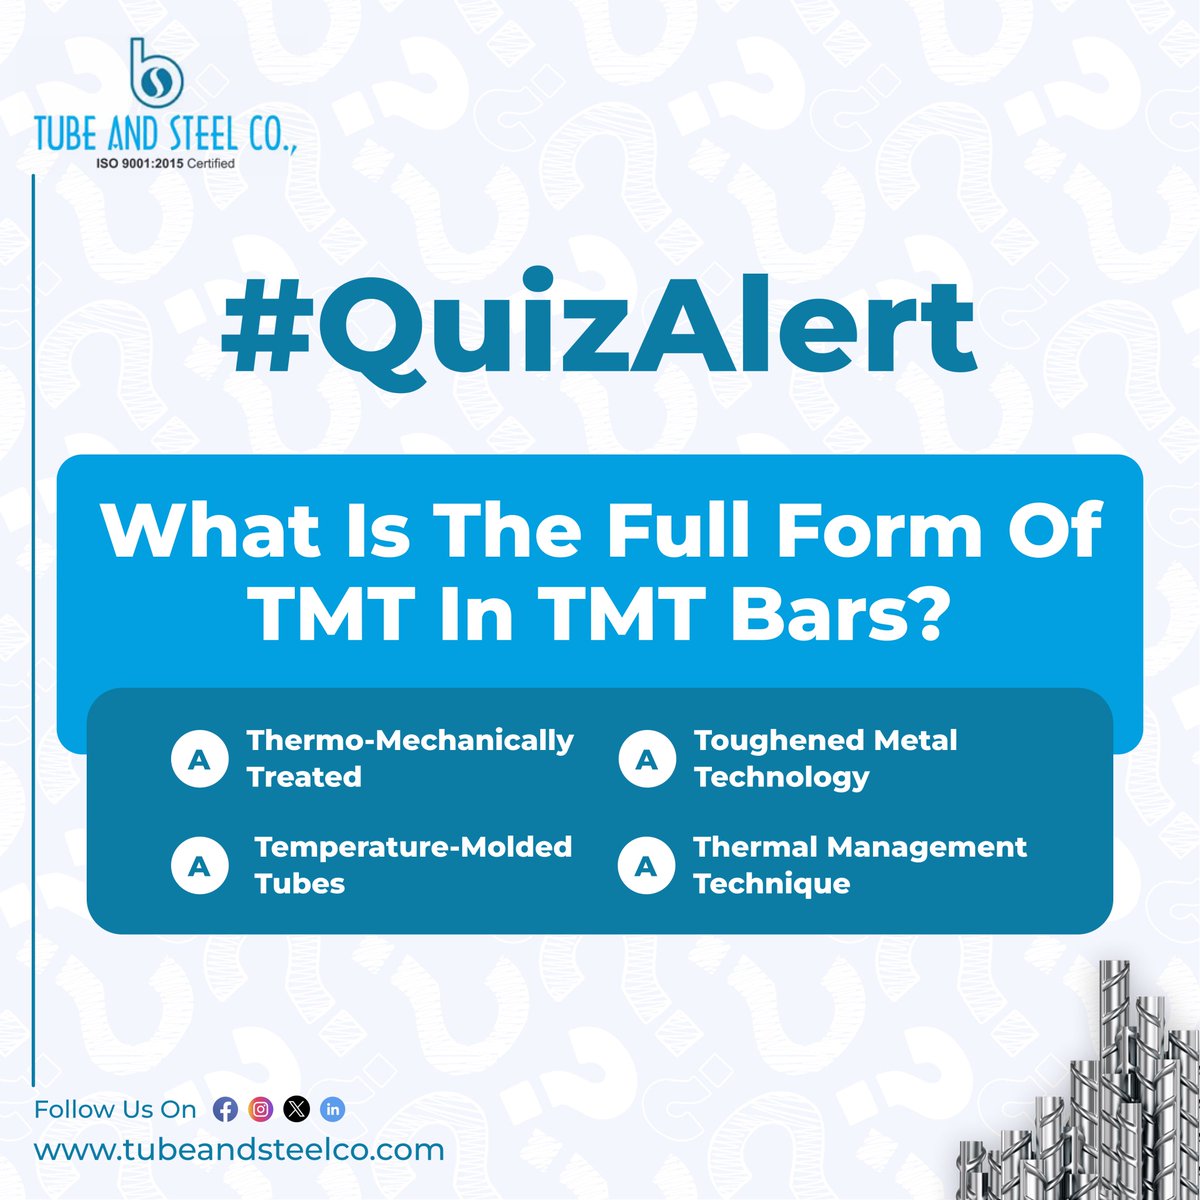 🌟 #QuizAlert 
🧠 Test your knowledge! 
Comment your answer below.👇

#tubeandsteel #steeldealers #irondealers #topquality #qualityiron #qualitysteel #tmt #tmtbars  #tmtbarsuppliers #tmtbardealers #besttmtbars